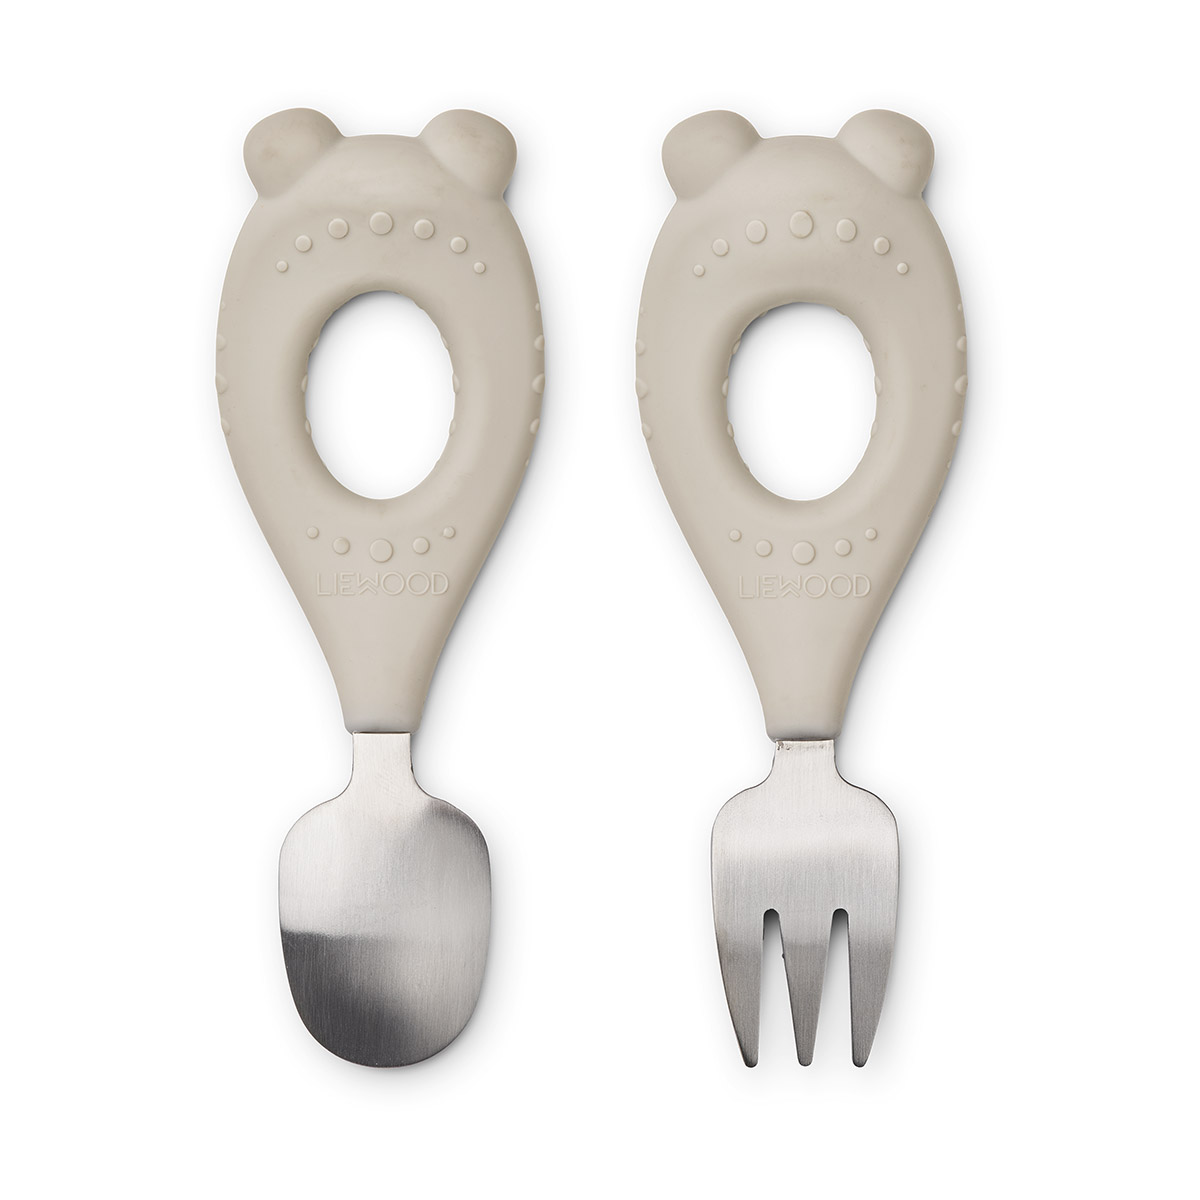 LIEWOOD stanly cutlery set